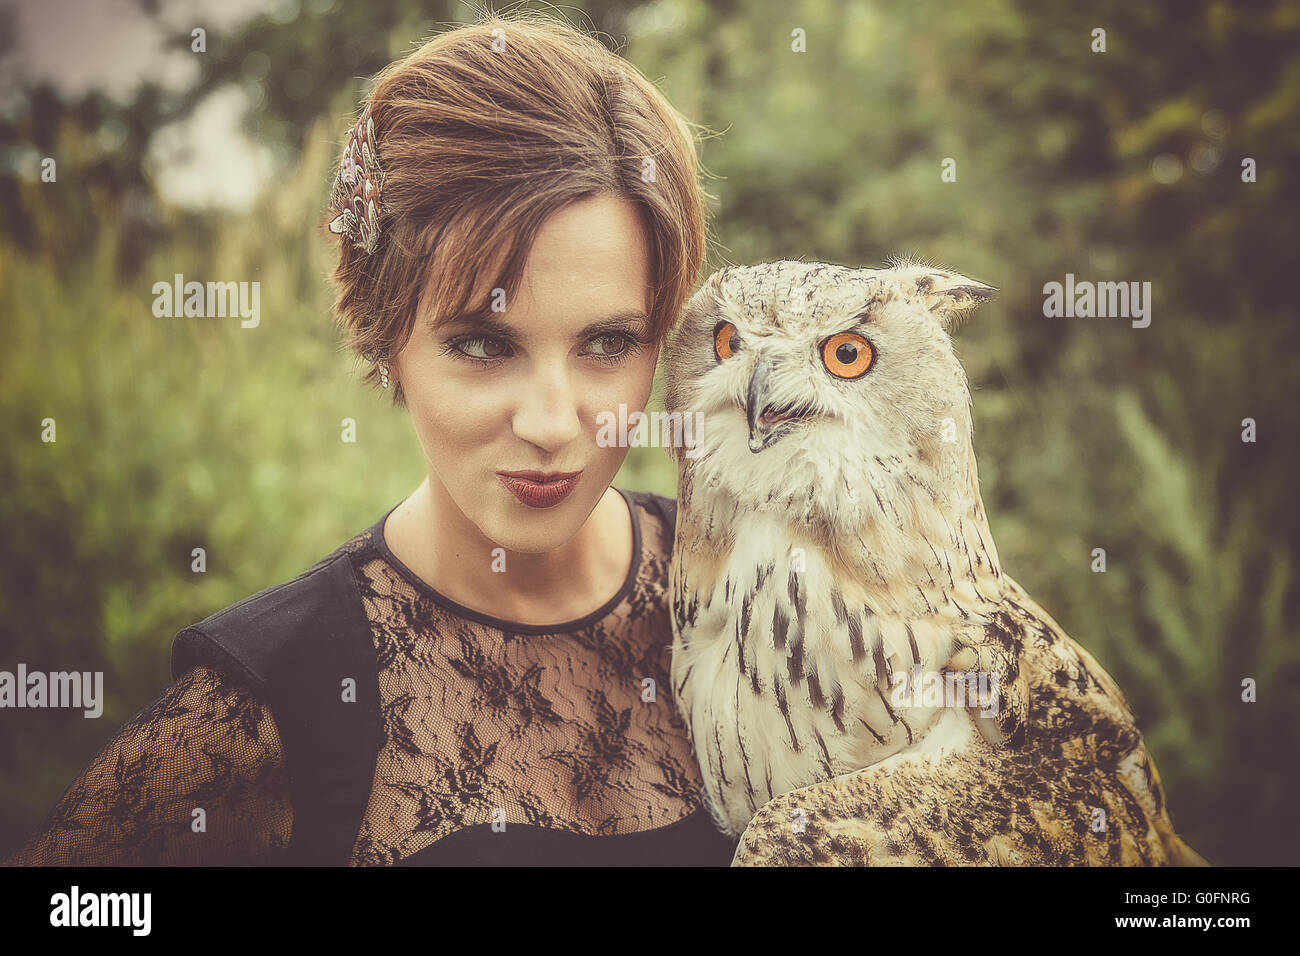 The owl with the Lady Stock Photo